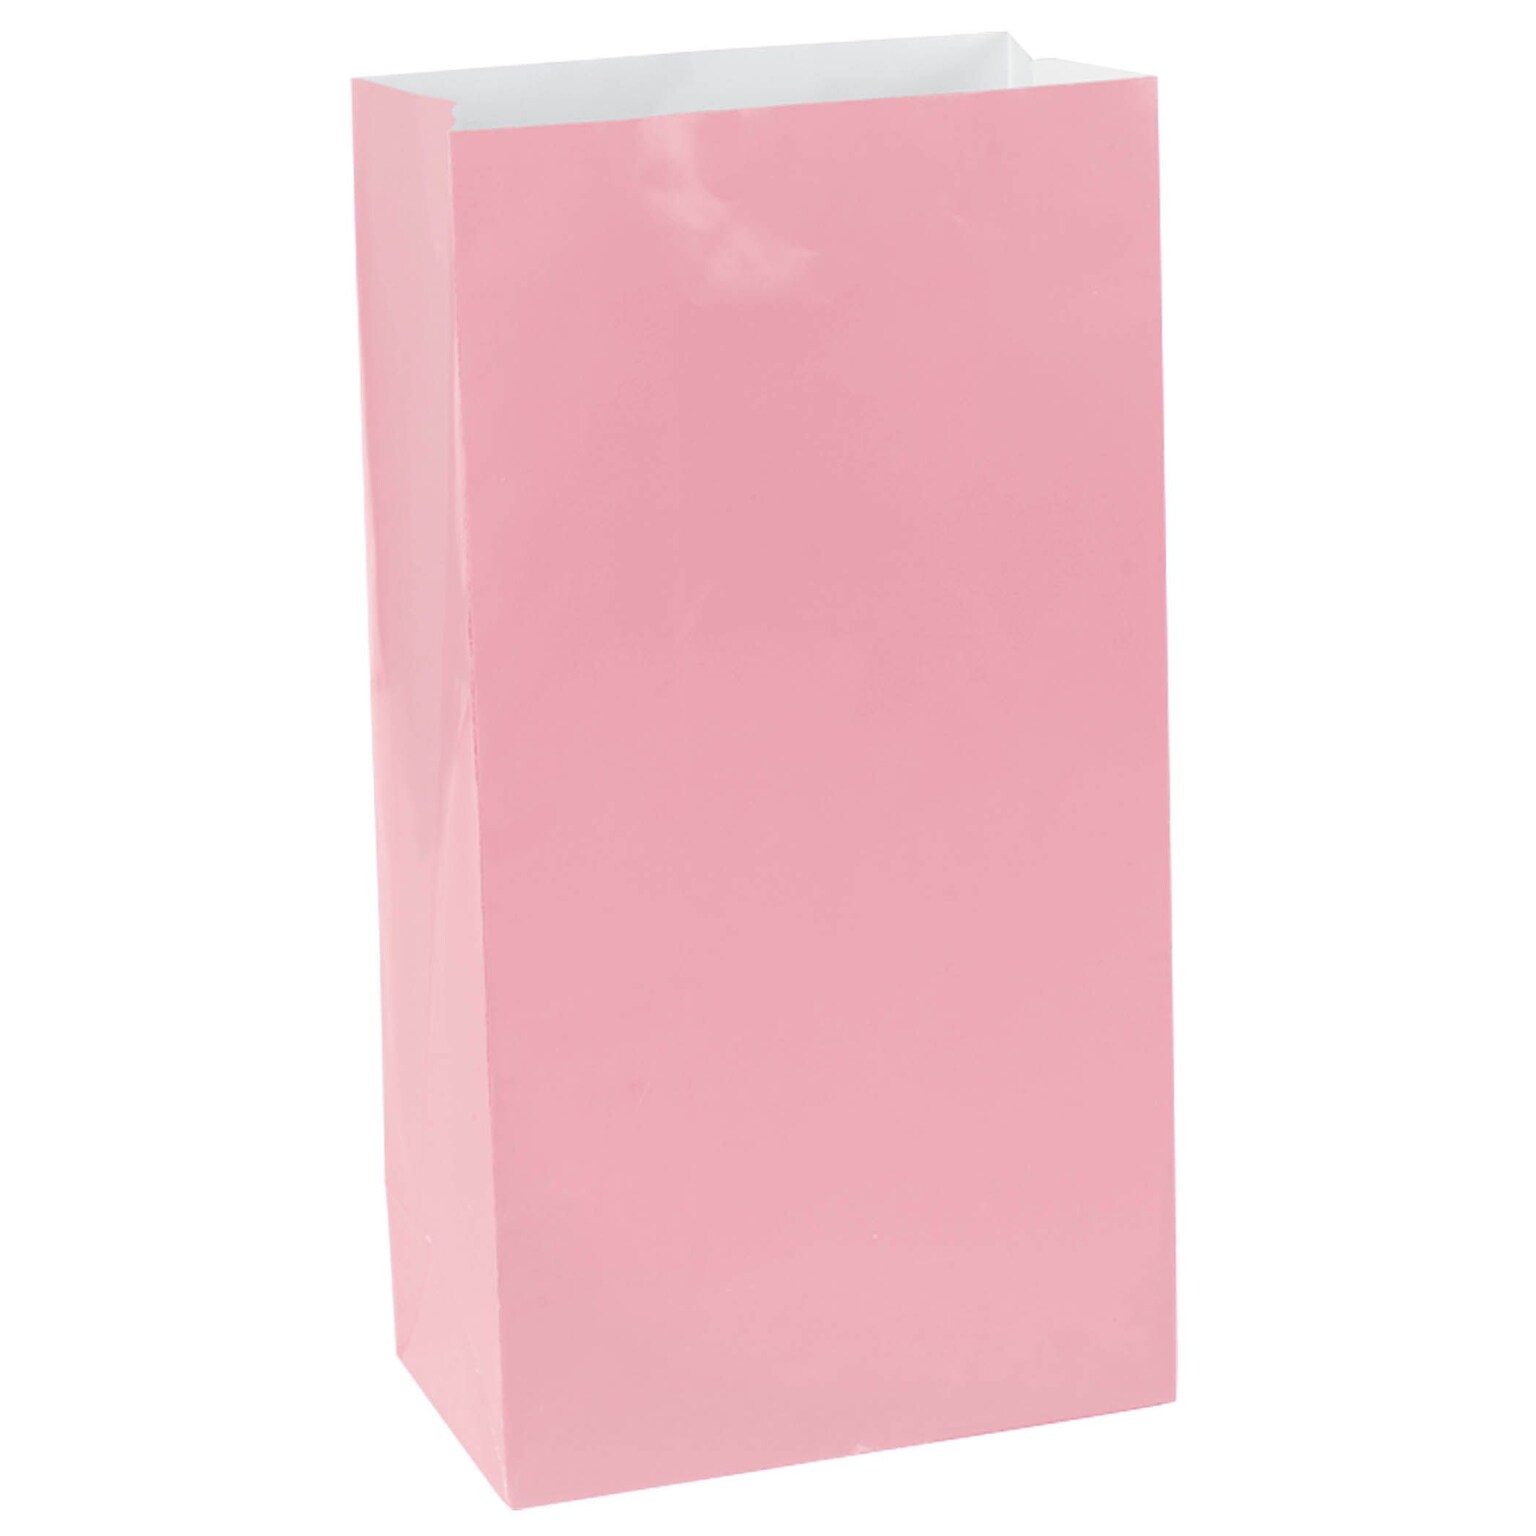 Amscan Paper Party Bag, 6.5 x 3, New Pink, 9/Pack, 12 Bags/Pack (370202.109)